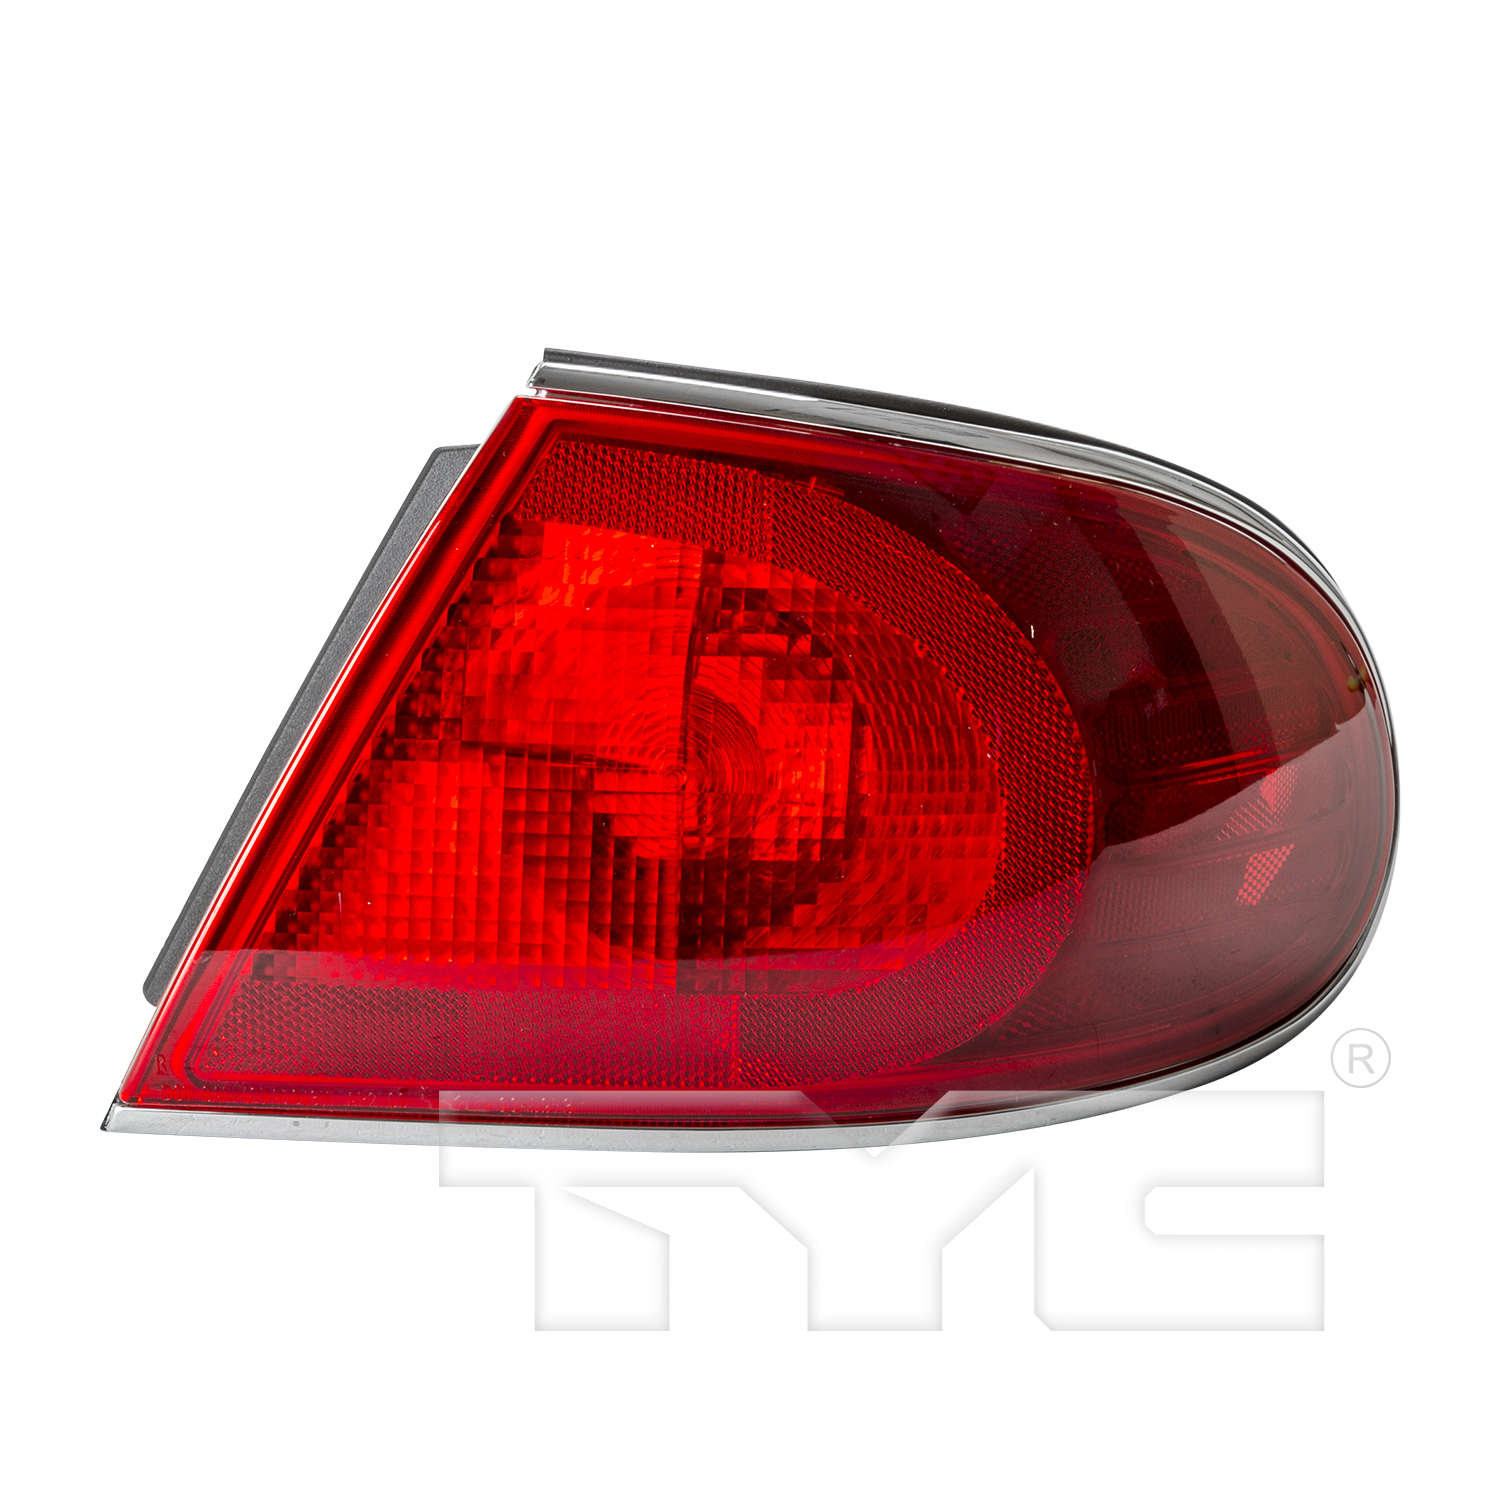 Aftermarket TAILLIGHTS for BUICK - LESABRE, LESABRE,01-05,RT Taillamp assy